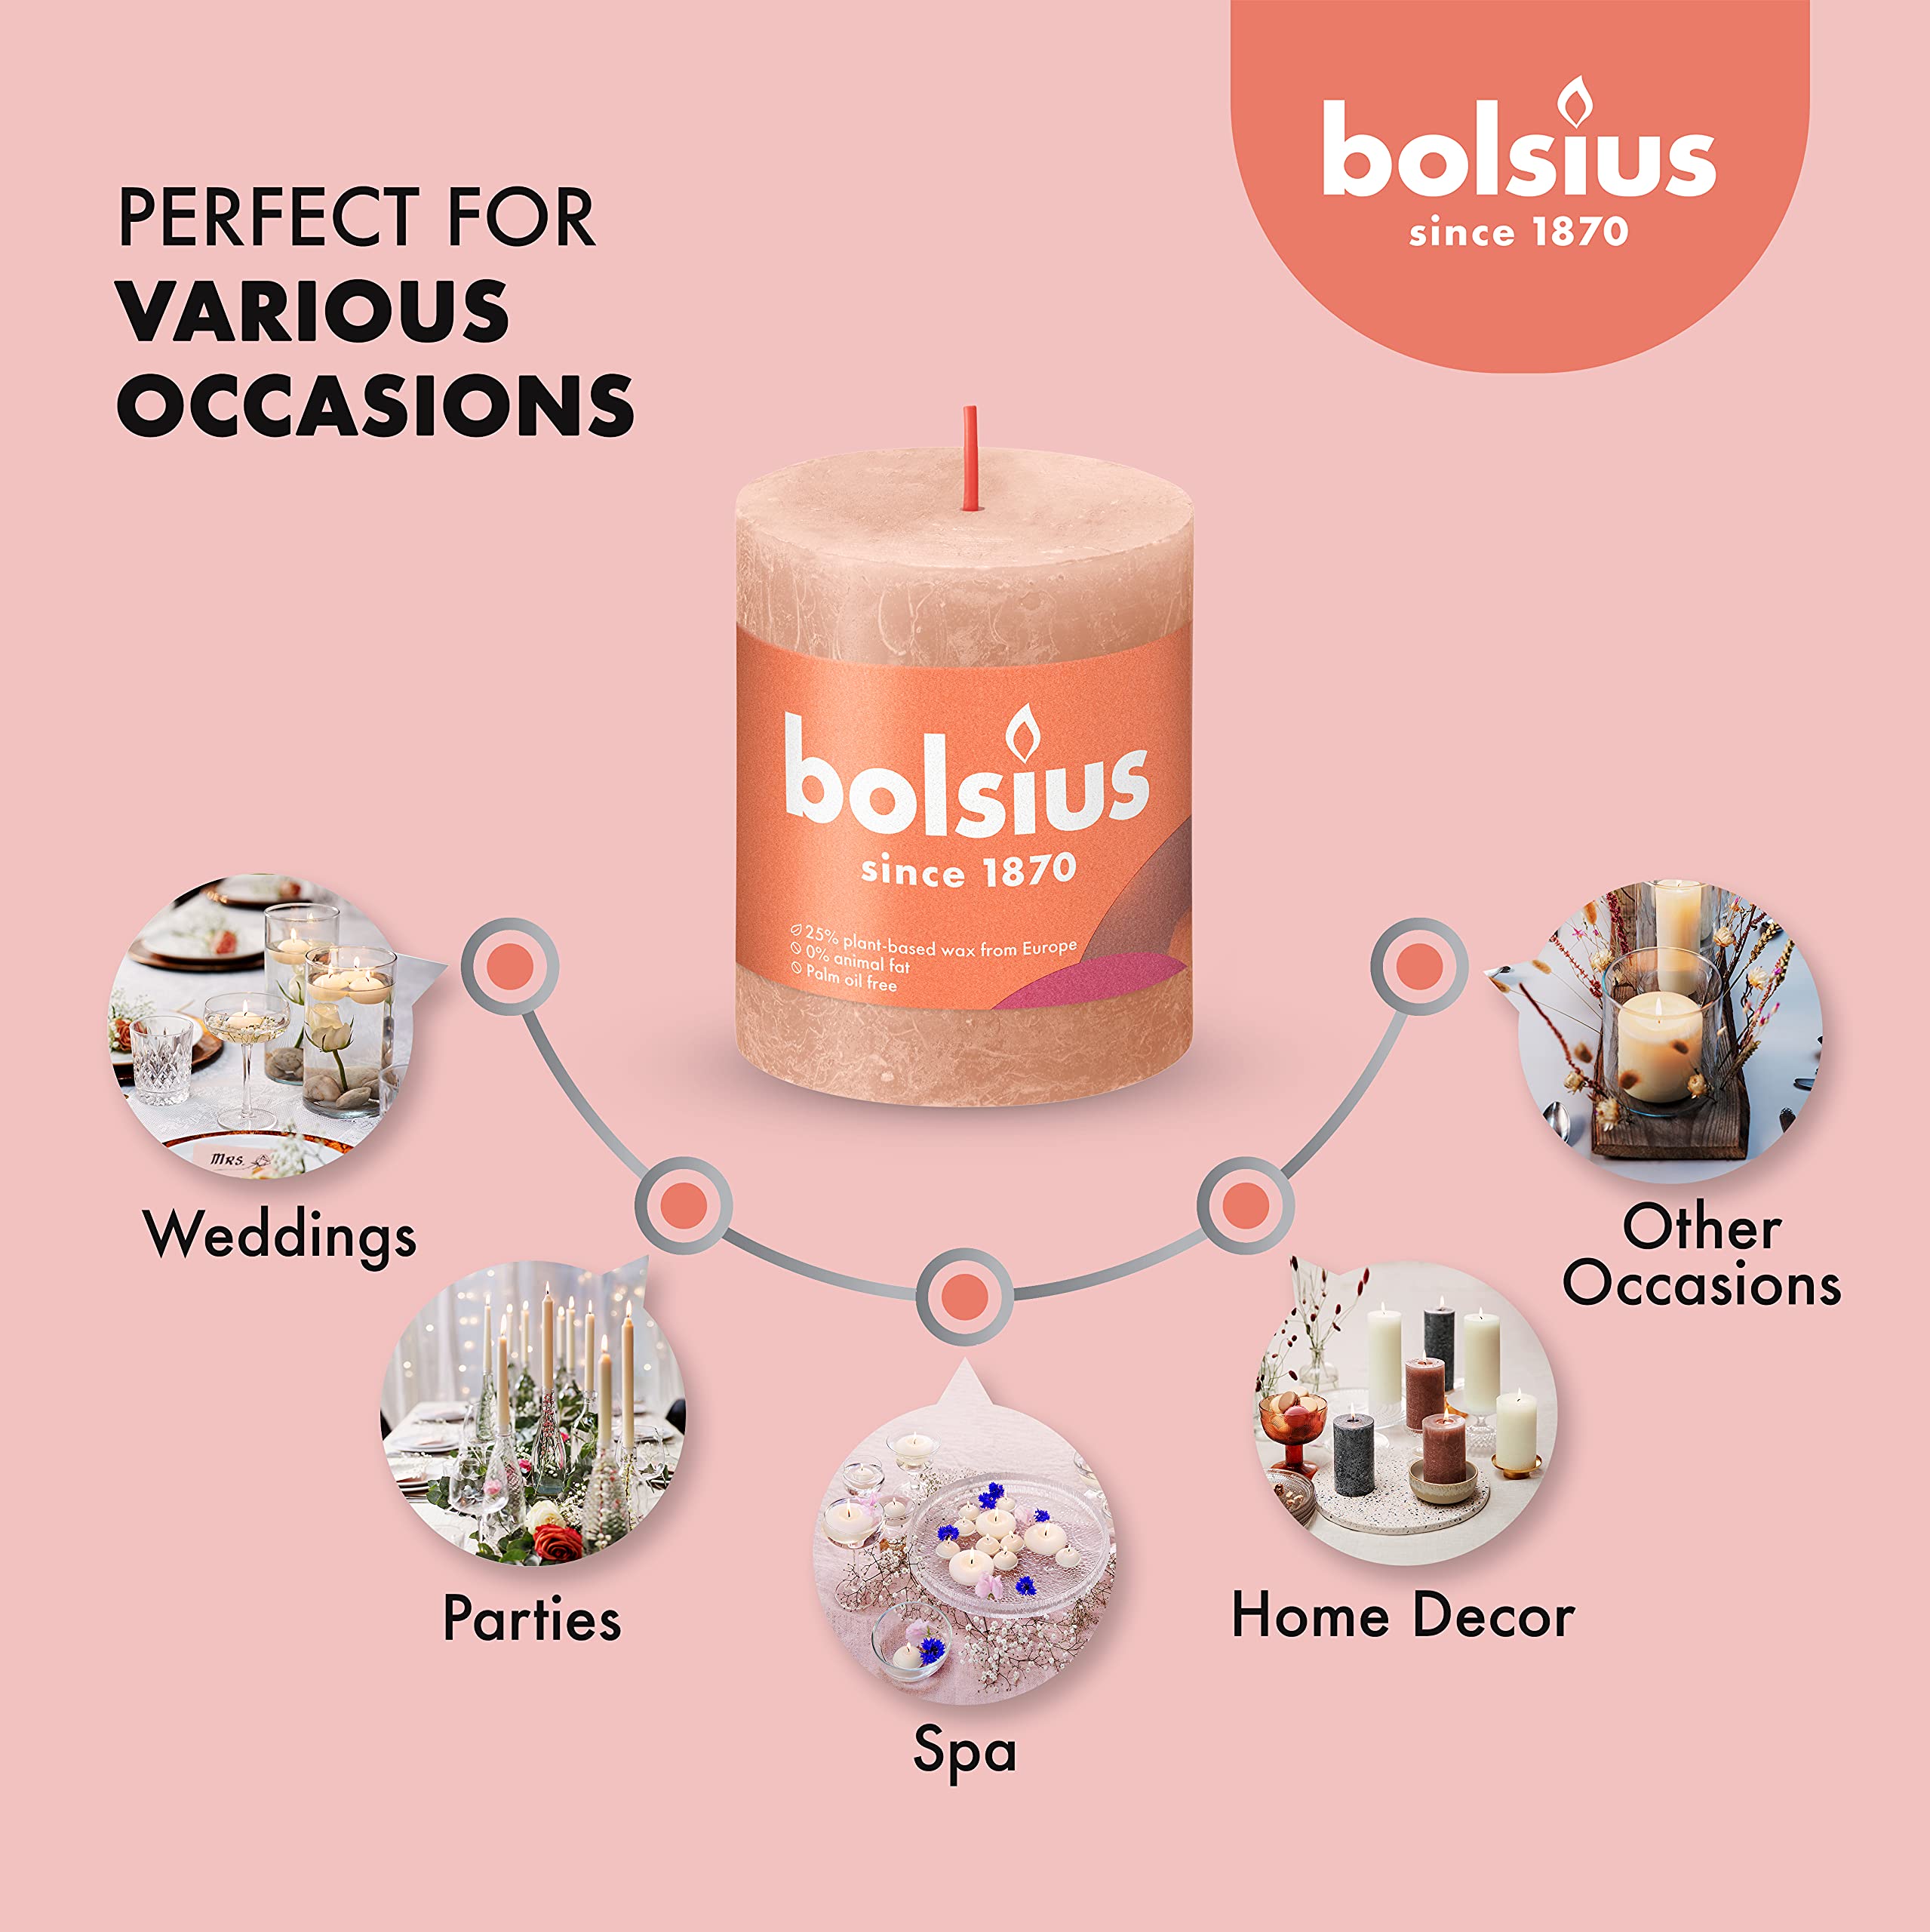 BOLSIUS 4 Pack Caramel Rustic Pillar Candles - 2.75 X 3.25 Inches - Premium European Quality - Includes Natural Plant-Based Wax - Unscented Dripless Smokeless 35 Hour Party and Wedding Candles  - Like New